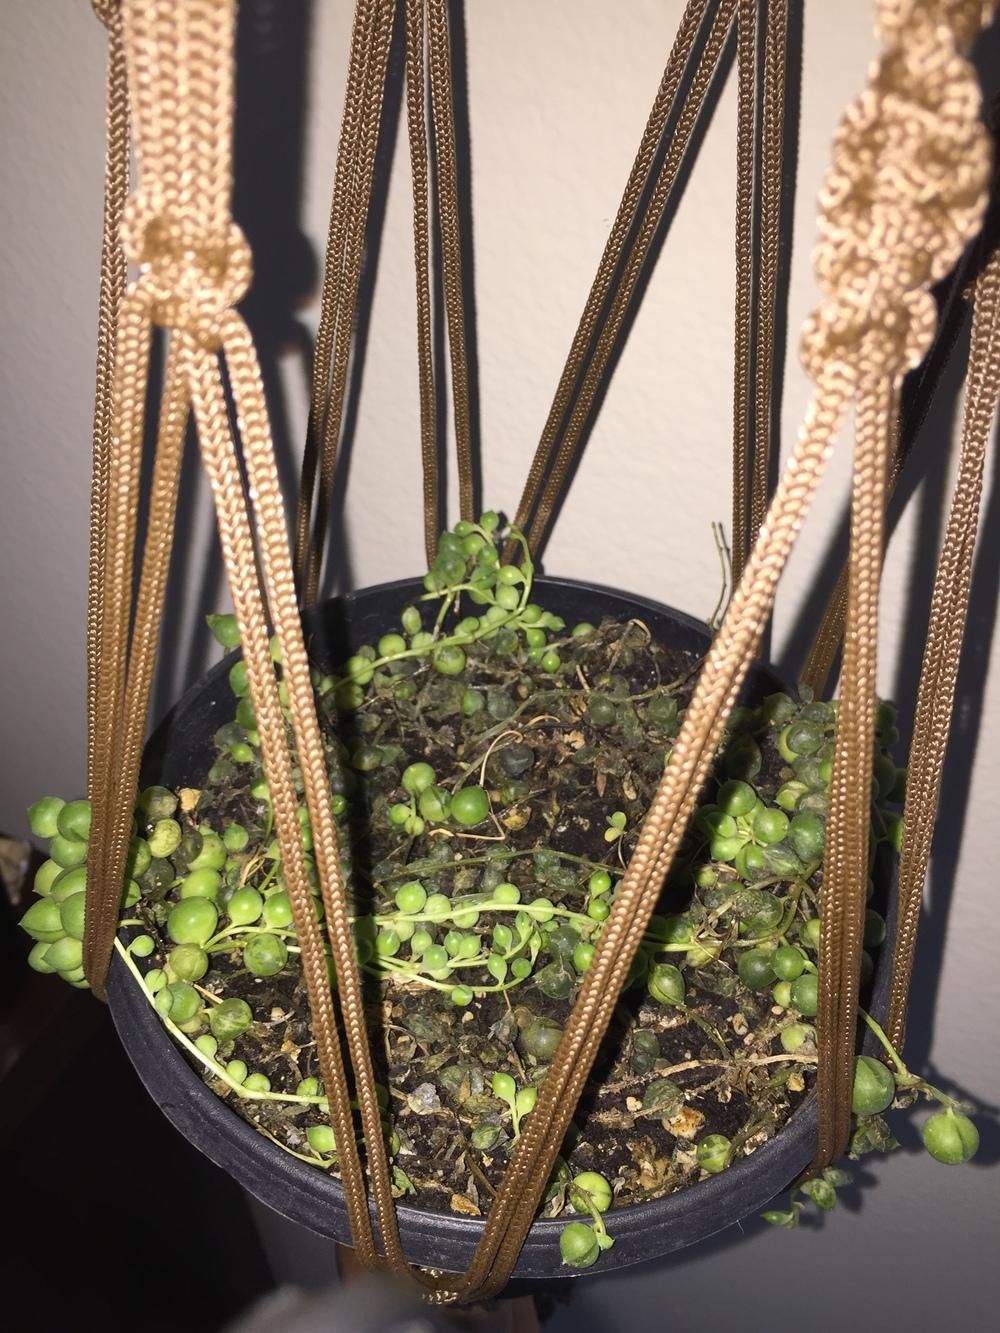 Photo of String of Pearls (Curio rowleyanus) uploaded by Weydsworld